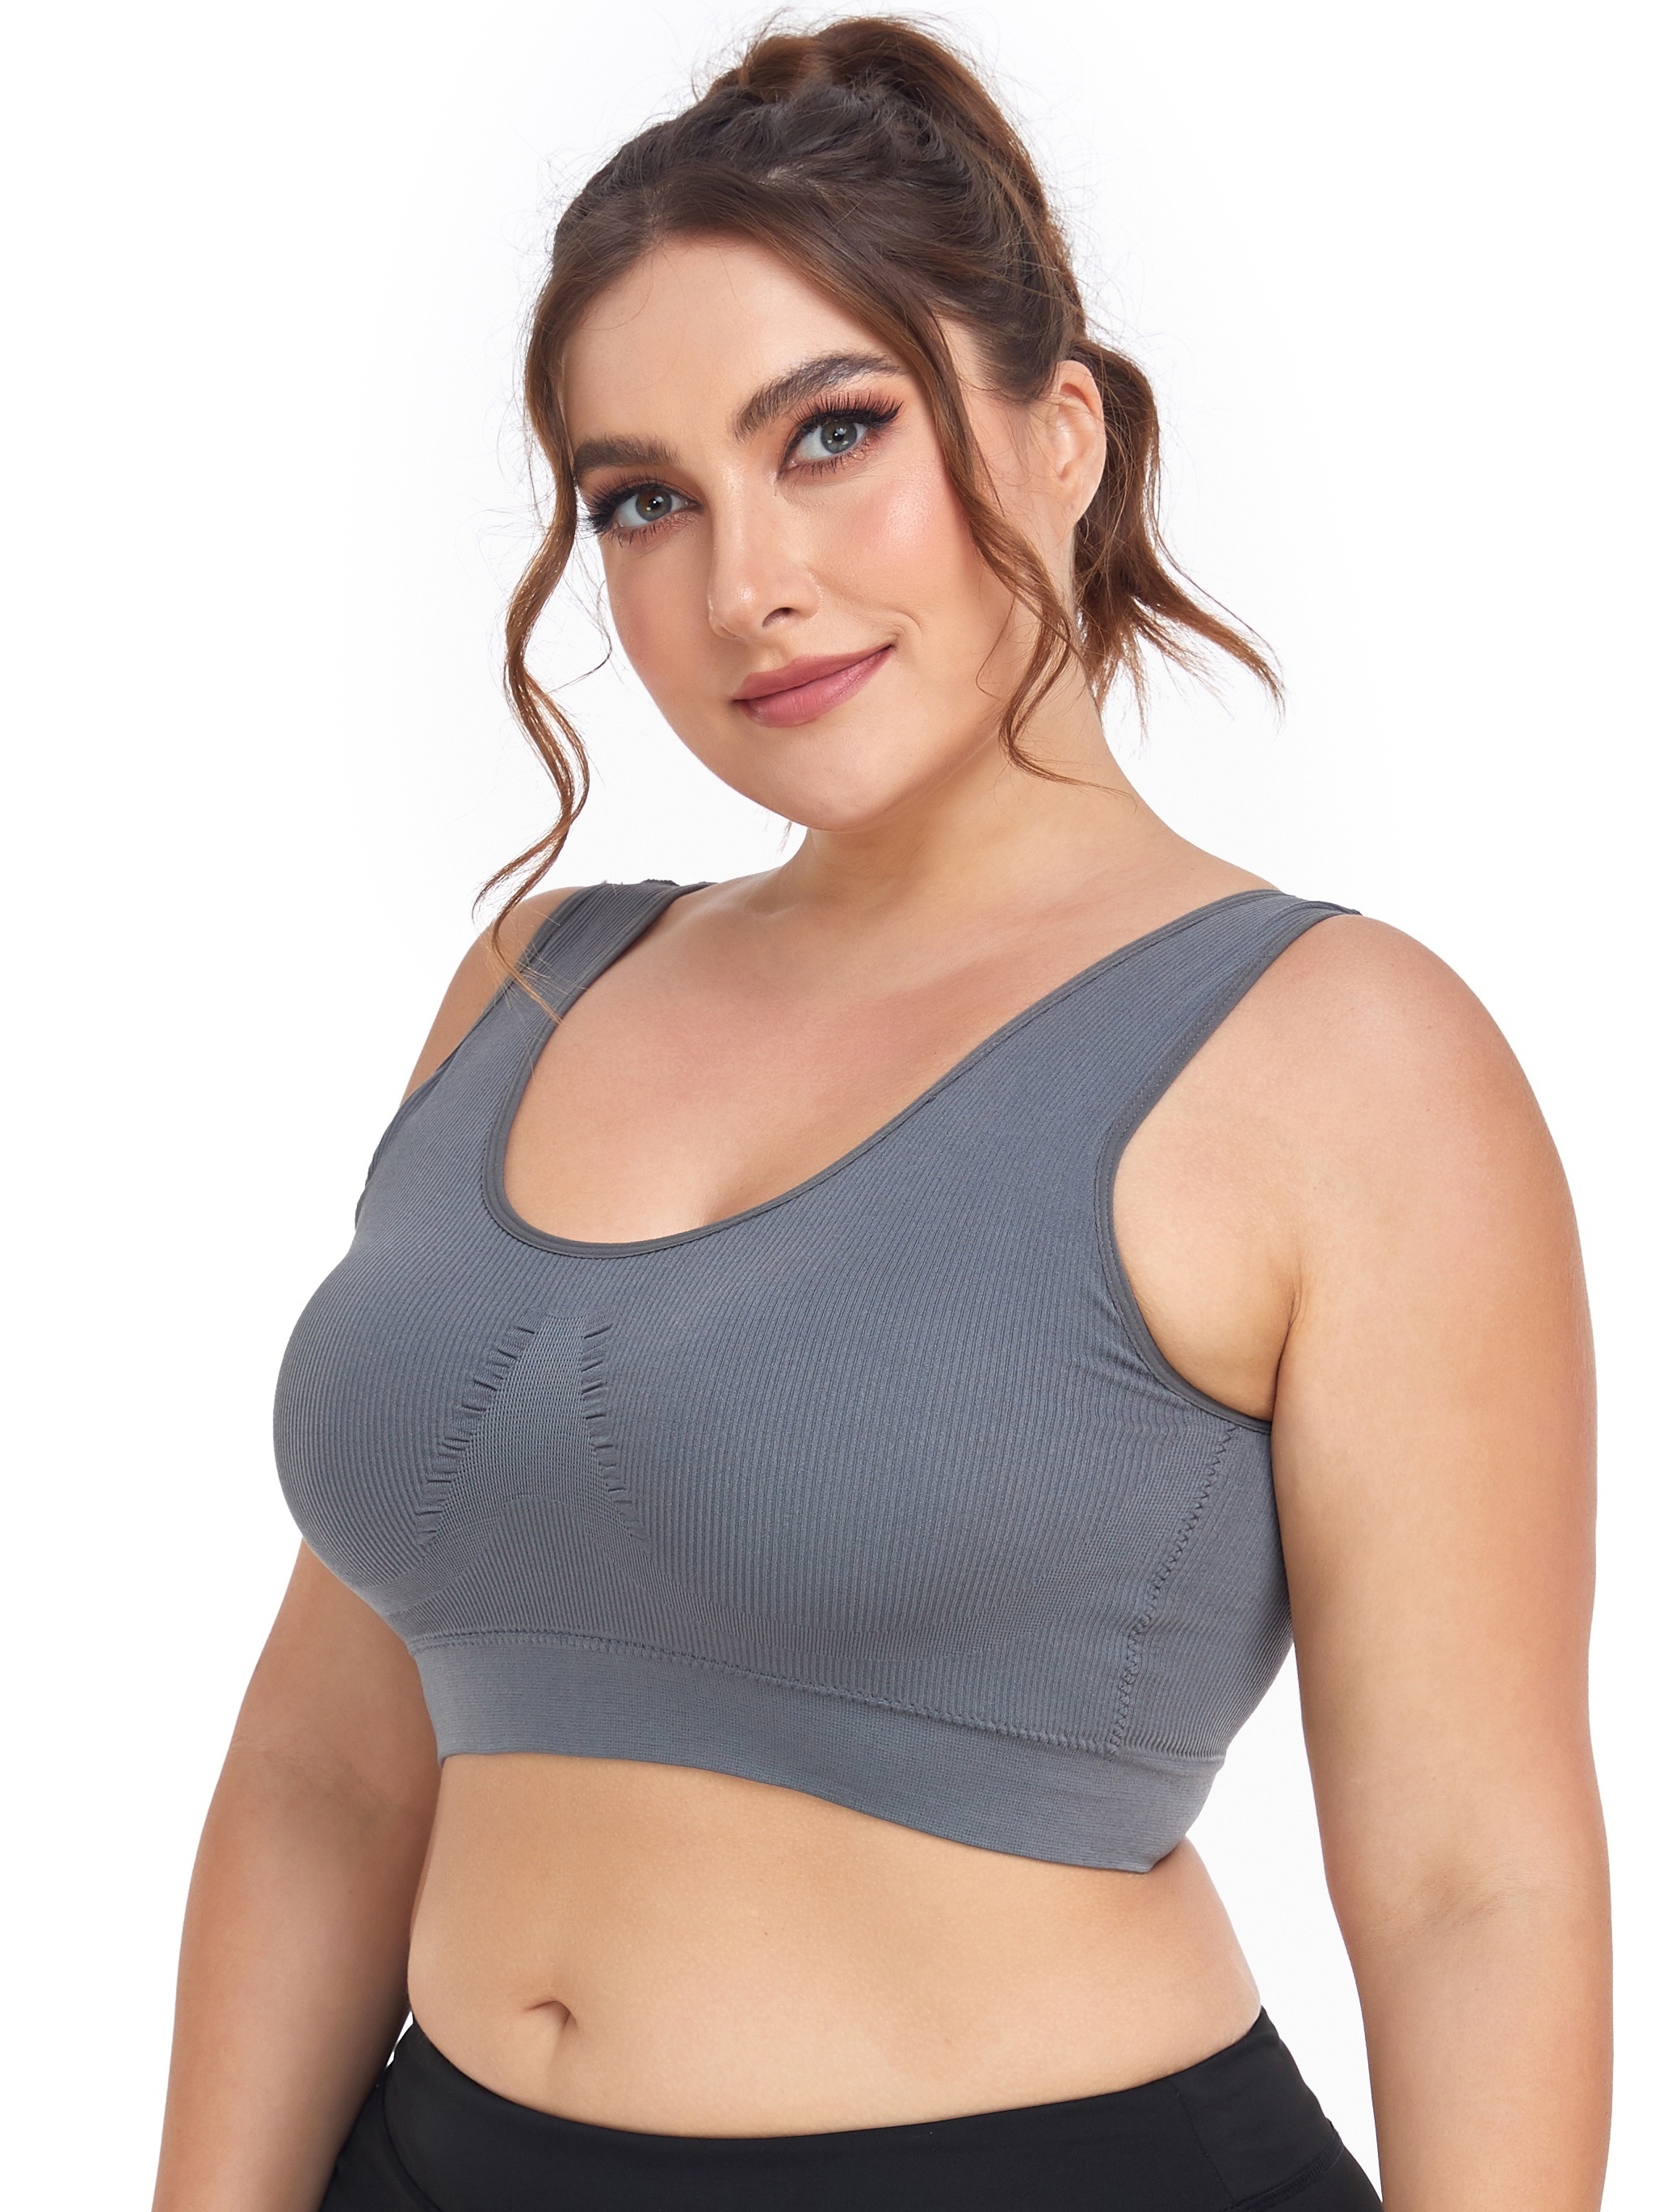 S-5XL Plus Size Womens Sports Bra Full-Coverage Pullover Stretch